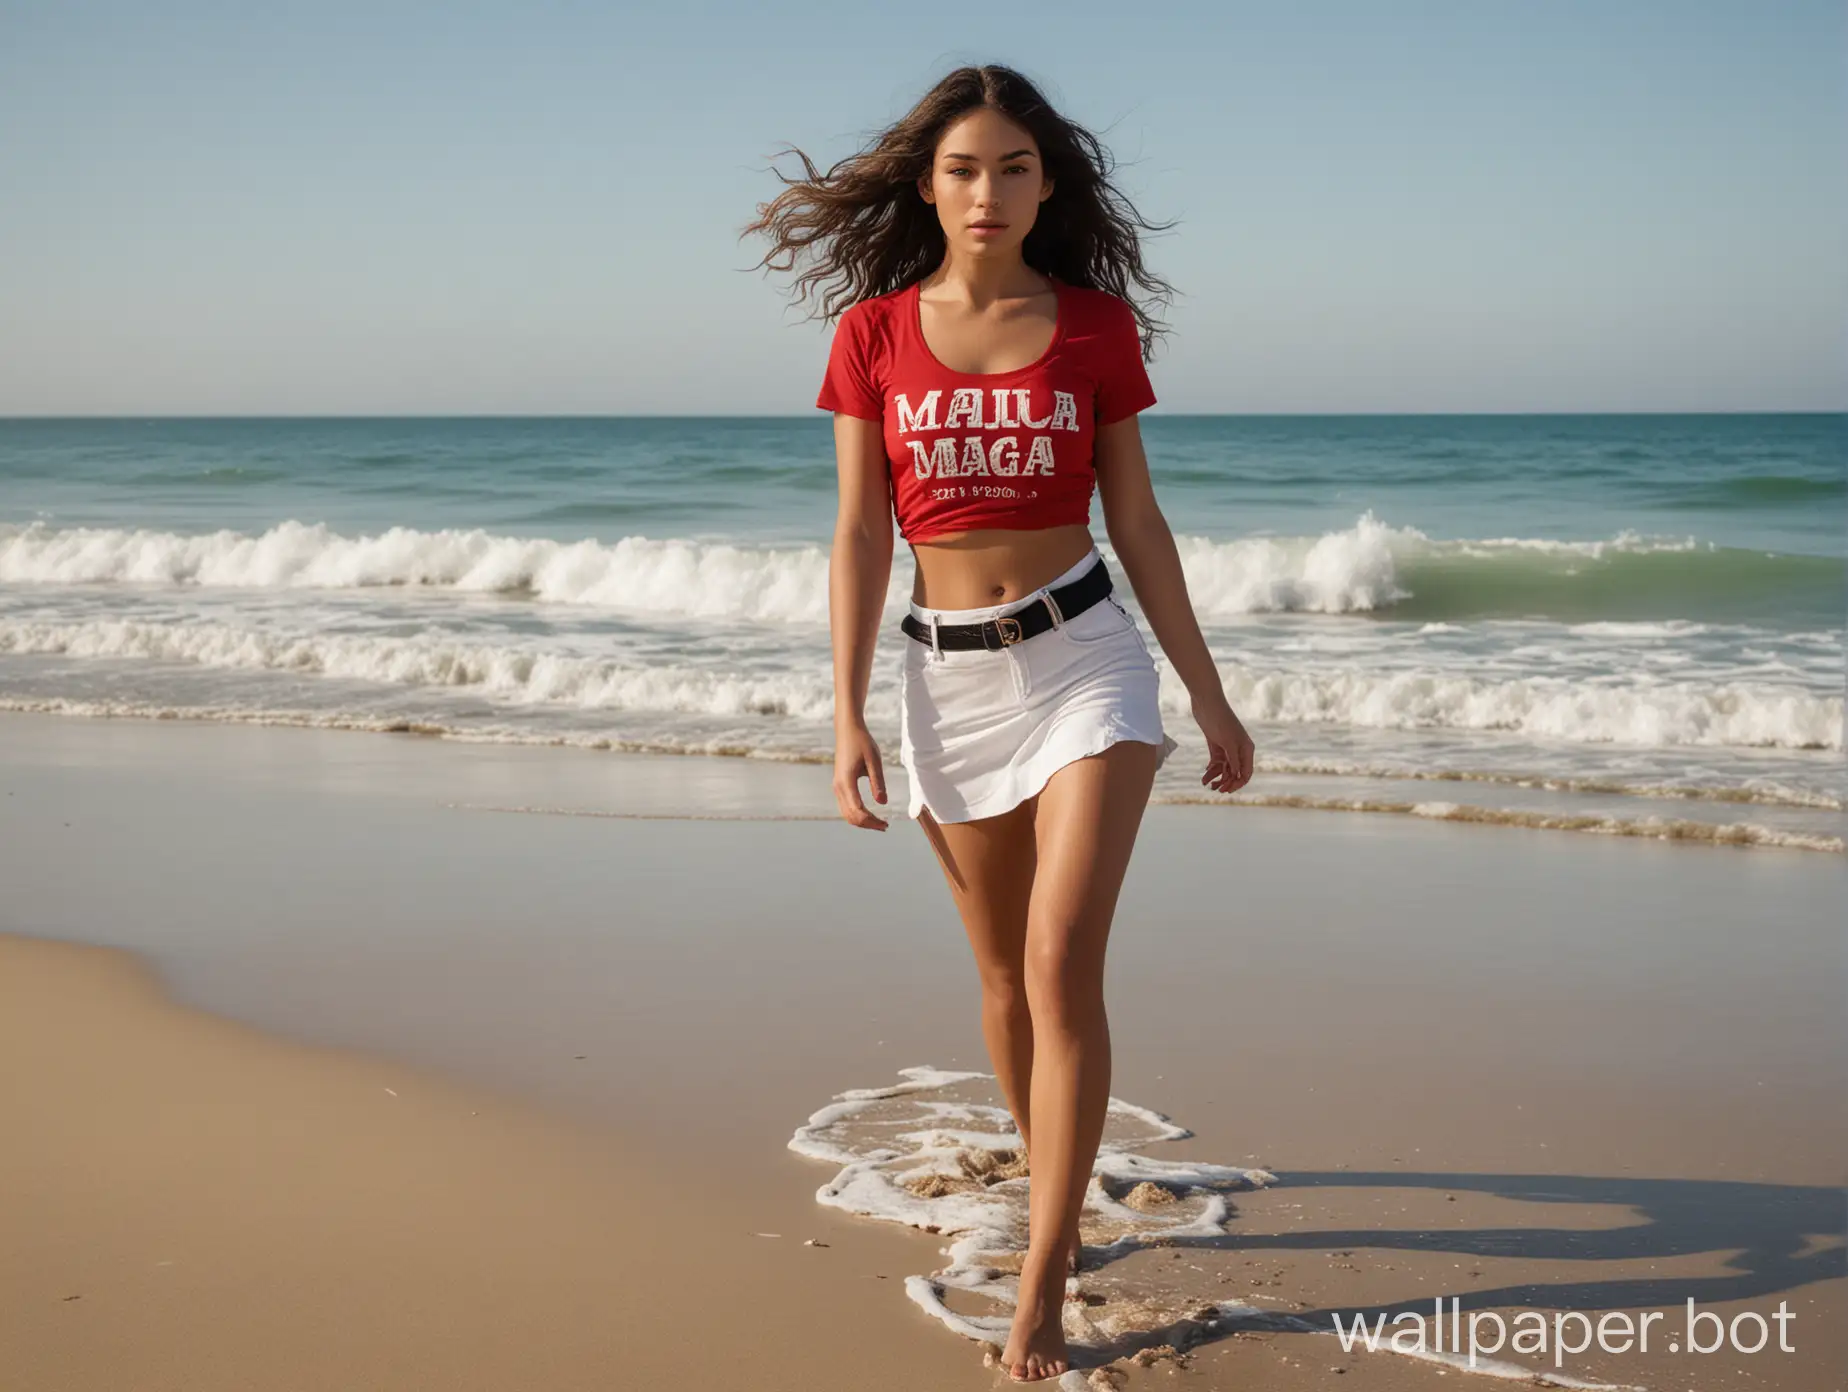 A captivating image of a self-assured attractive Latina model strolling along a sun-kissed beach. She confidently strides through the golden sand, with the pristine blue ocean as her backdrop. Her outfit consists of a short, form-fitting black miniskirt and a red T-shirt bearing the bold statement "MAGA" in white letters. Her long, wavy hair flows gracefully down her back, contrasting her determined stride. The determined glint in her eyes and her unwavering posture exude a strong sense of independence and self-confidence, highlighting her connection to the natural beauty of the beach.